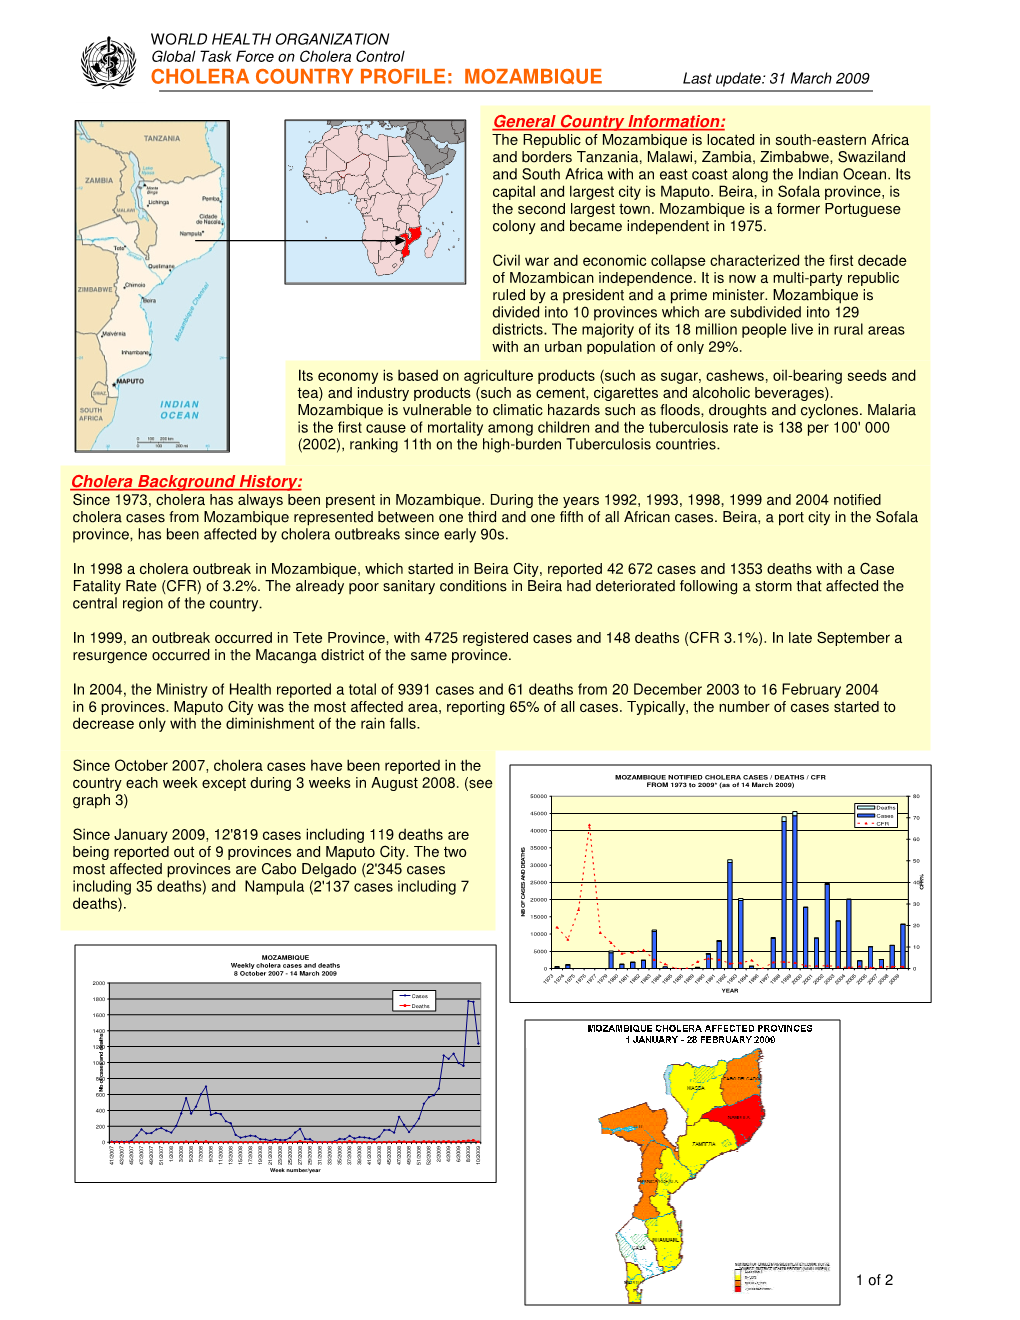 CHOLERA COUNTRY PROFILE: MOZAMBIQUE Last Update: 31 March 2009